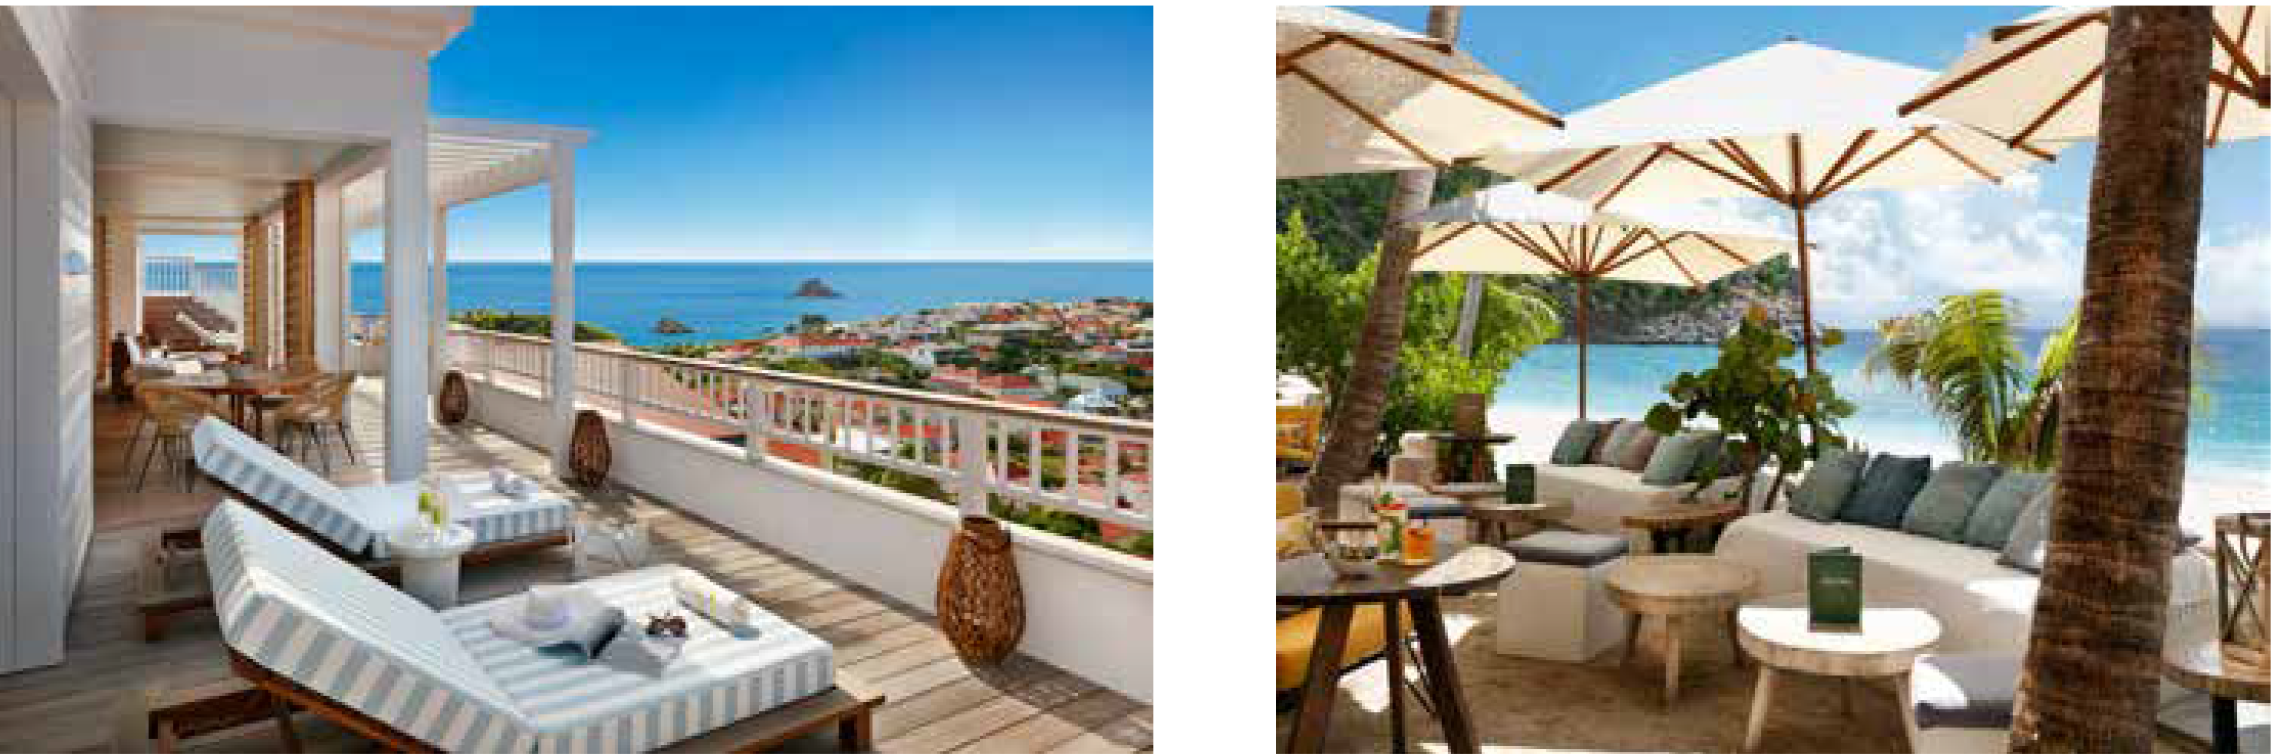 Carl Gustaf view and the Shellona Beach restaurant, photos by Fabrice Rambert